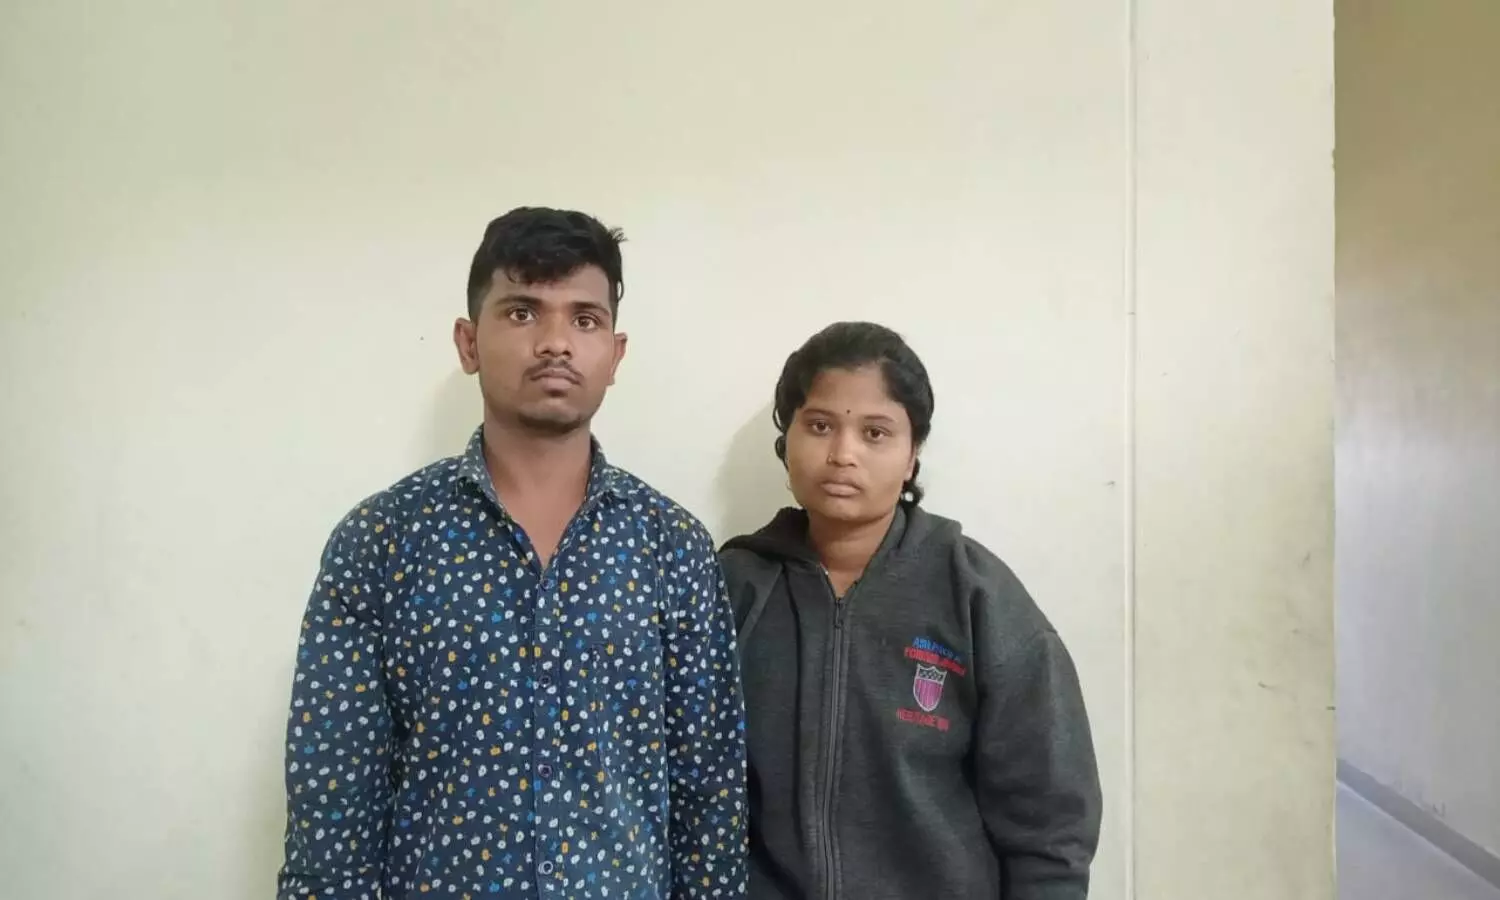 Meerpet police arrest brother-sister duo for murder